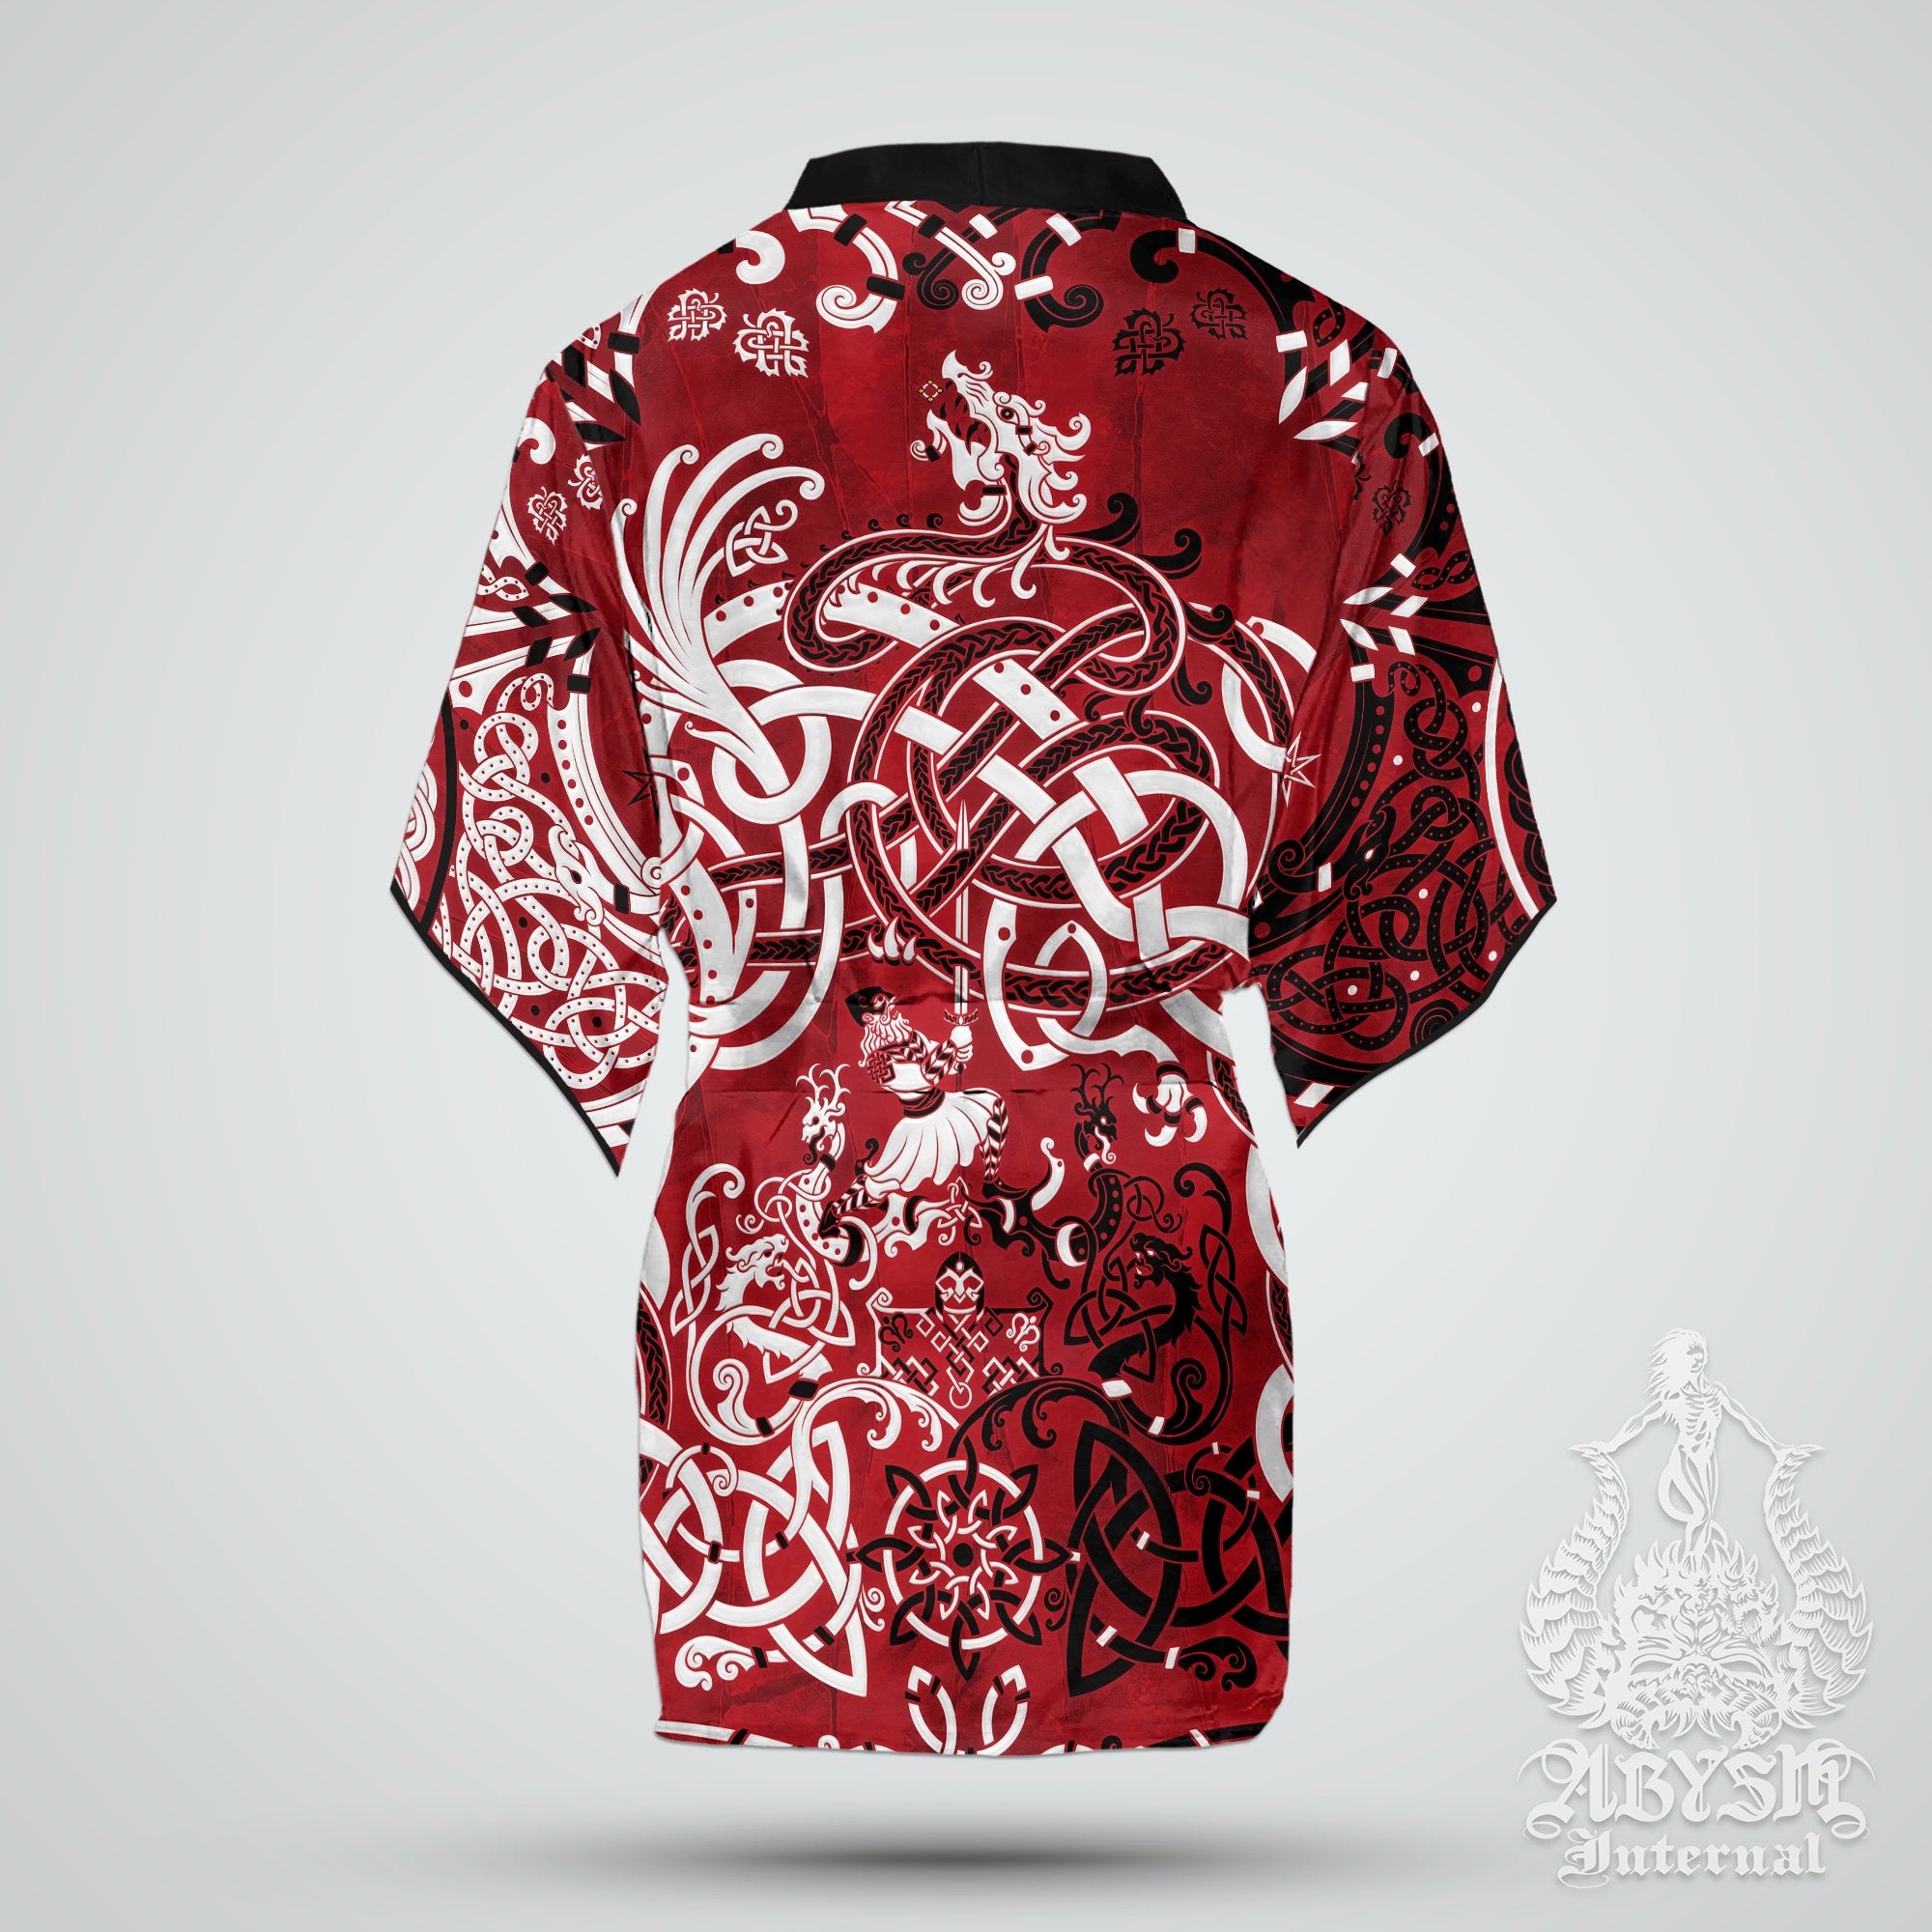 Viking Cover Up, Beach Outfit, Norse Party Kimono, Summer Festival Robe, Indie and Alternative Clothing, Unisex - Dragon Fafnir, Bloody Red Goth - Abysm Internal